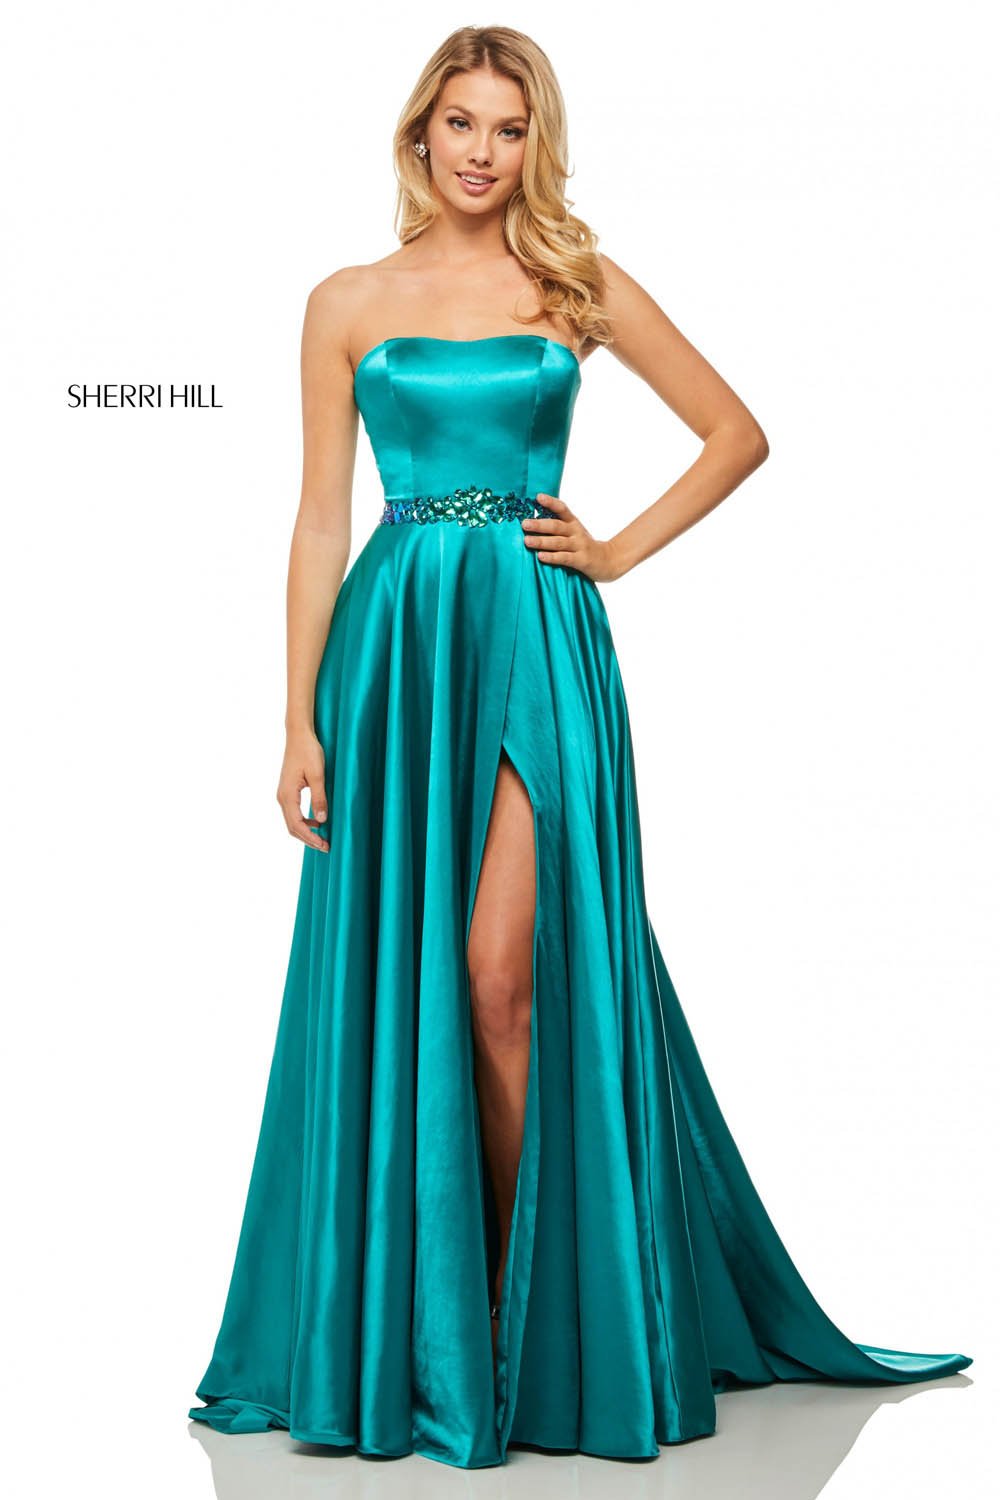 Sherri Hill 52841 dress images in these colors: Purple, Fuchsia, Teal, Turquoise, Emerald, Wine.